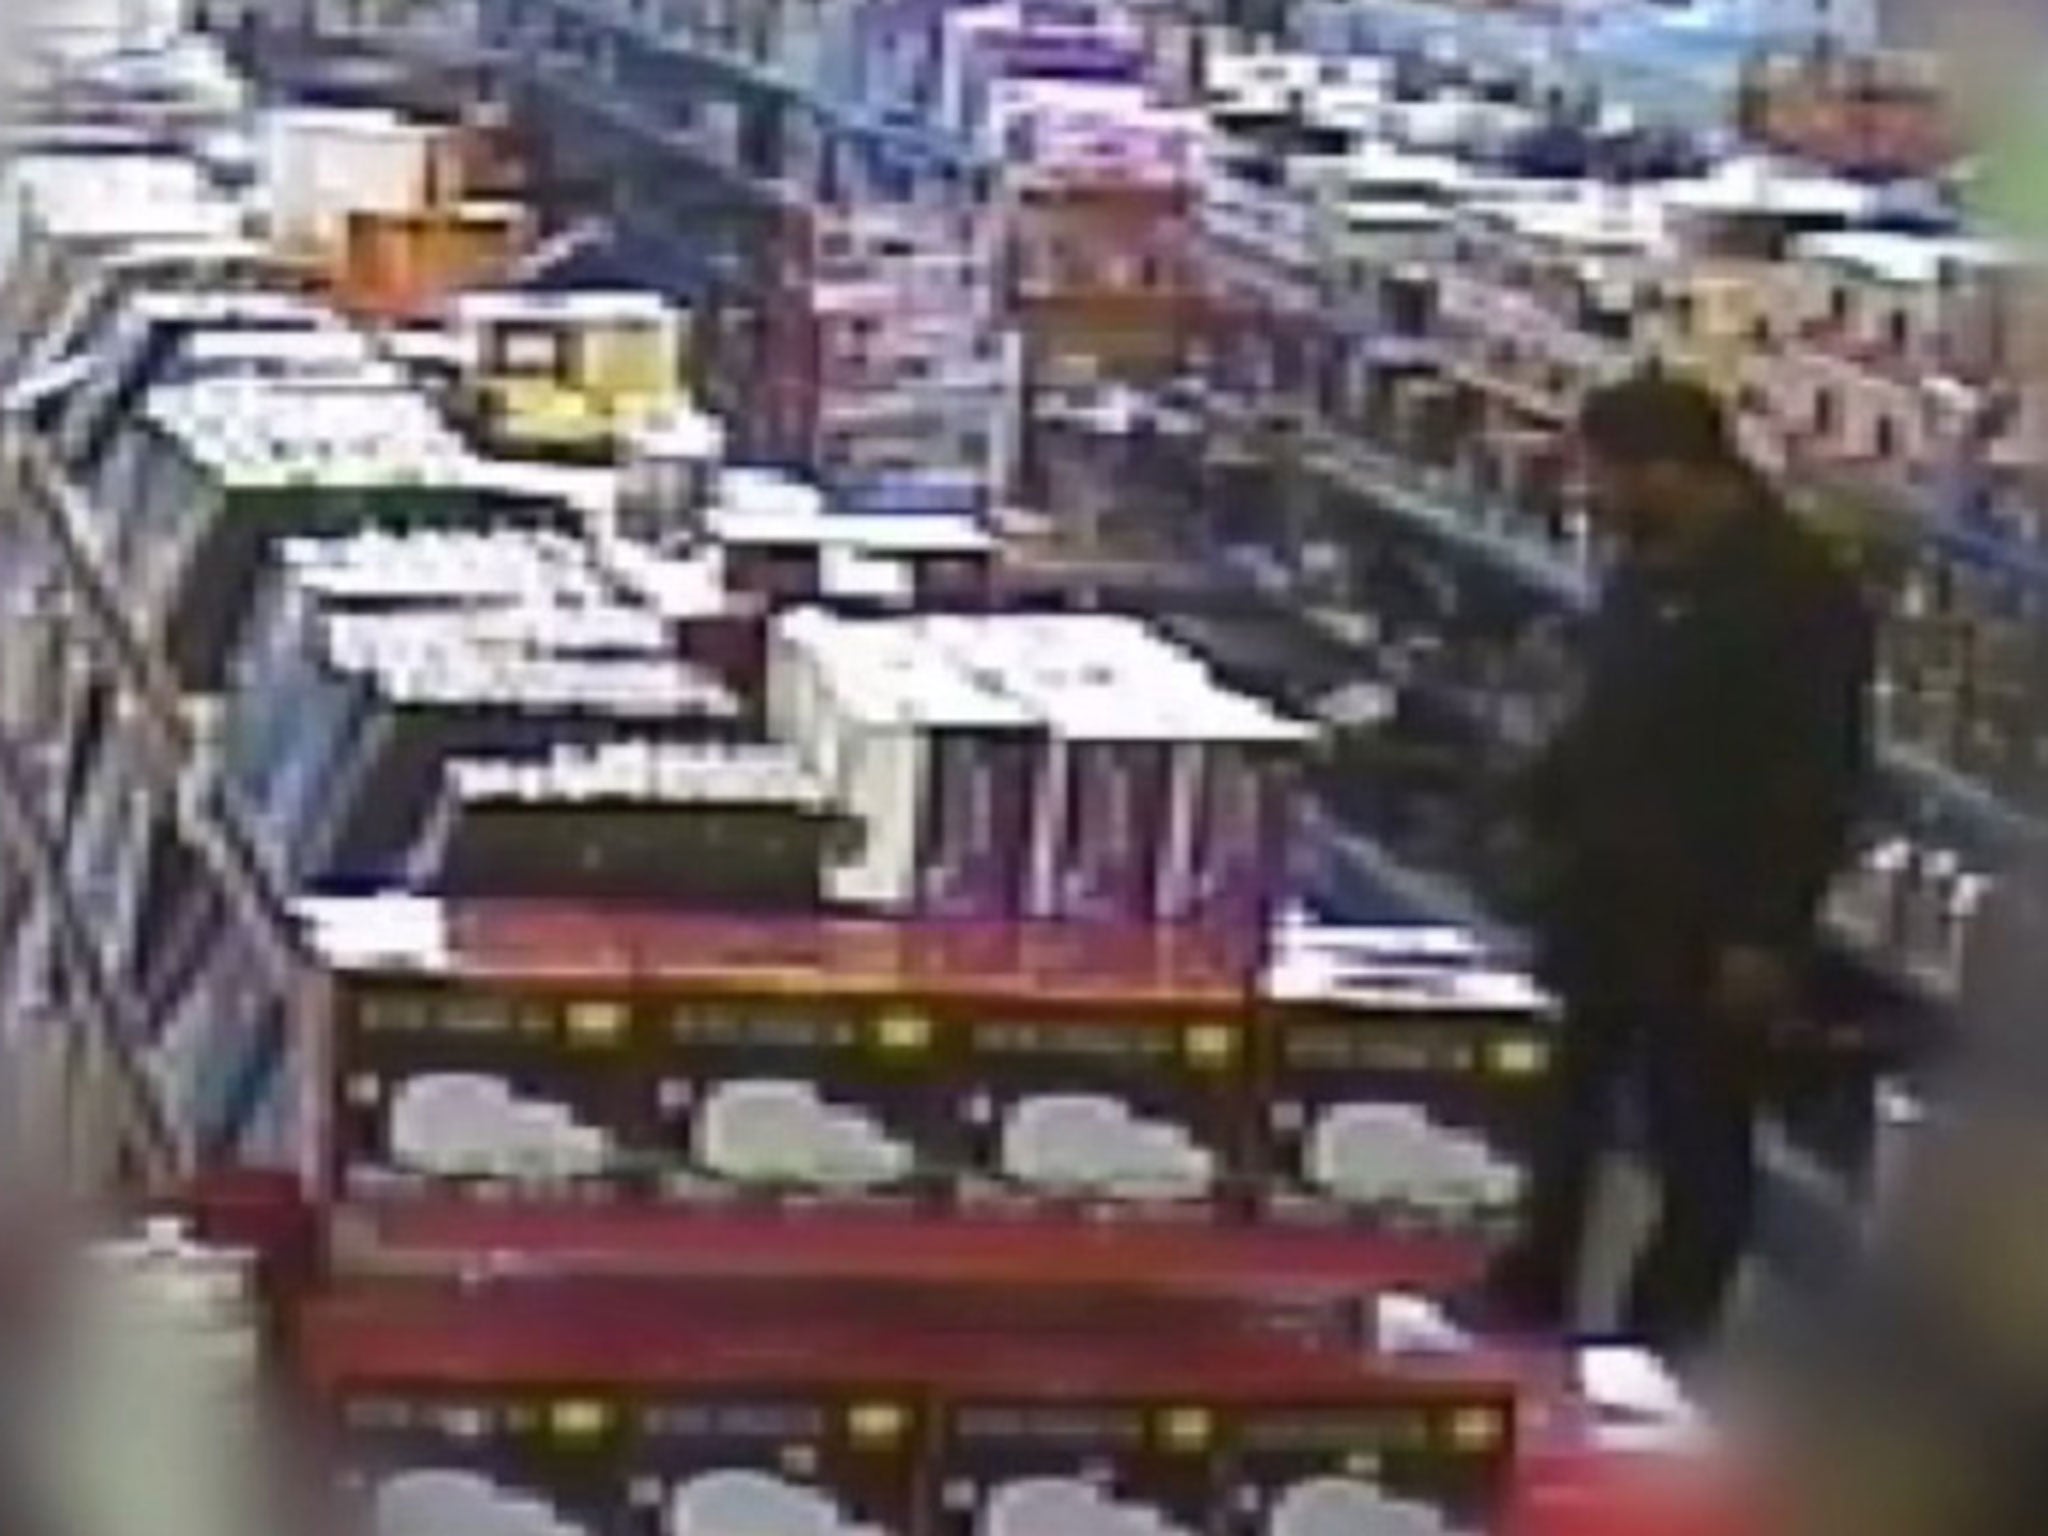 Munir Mohammed looking at pressure cookers at a shop in Derby, during the time he was attempting to build a bomb